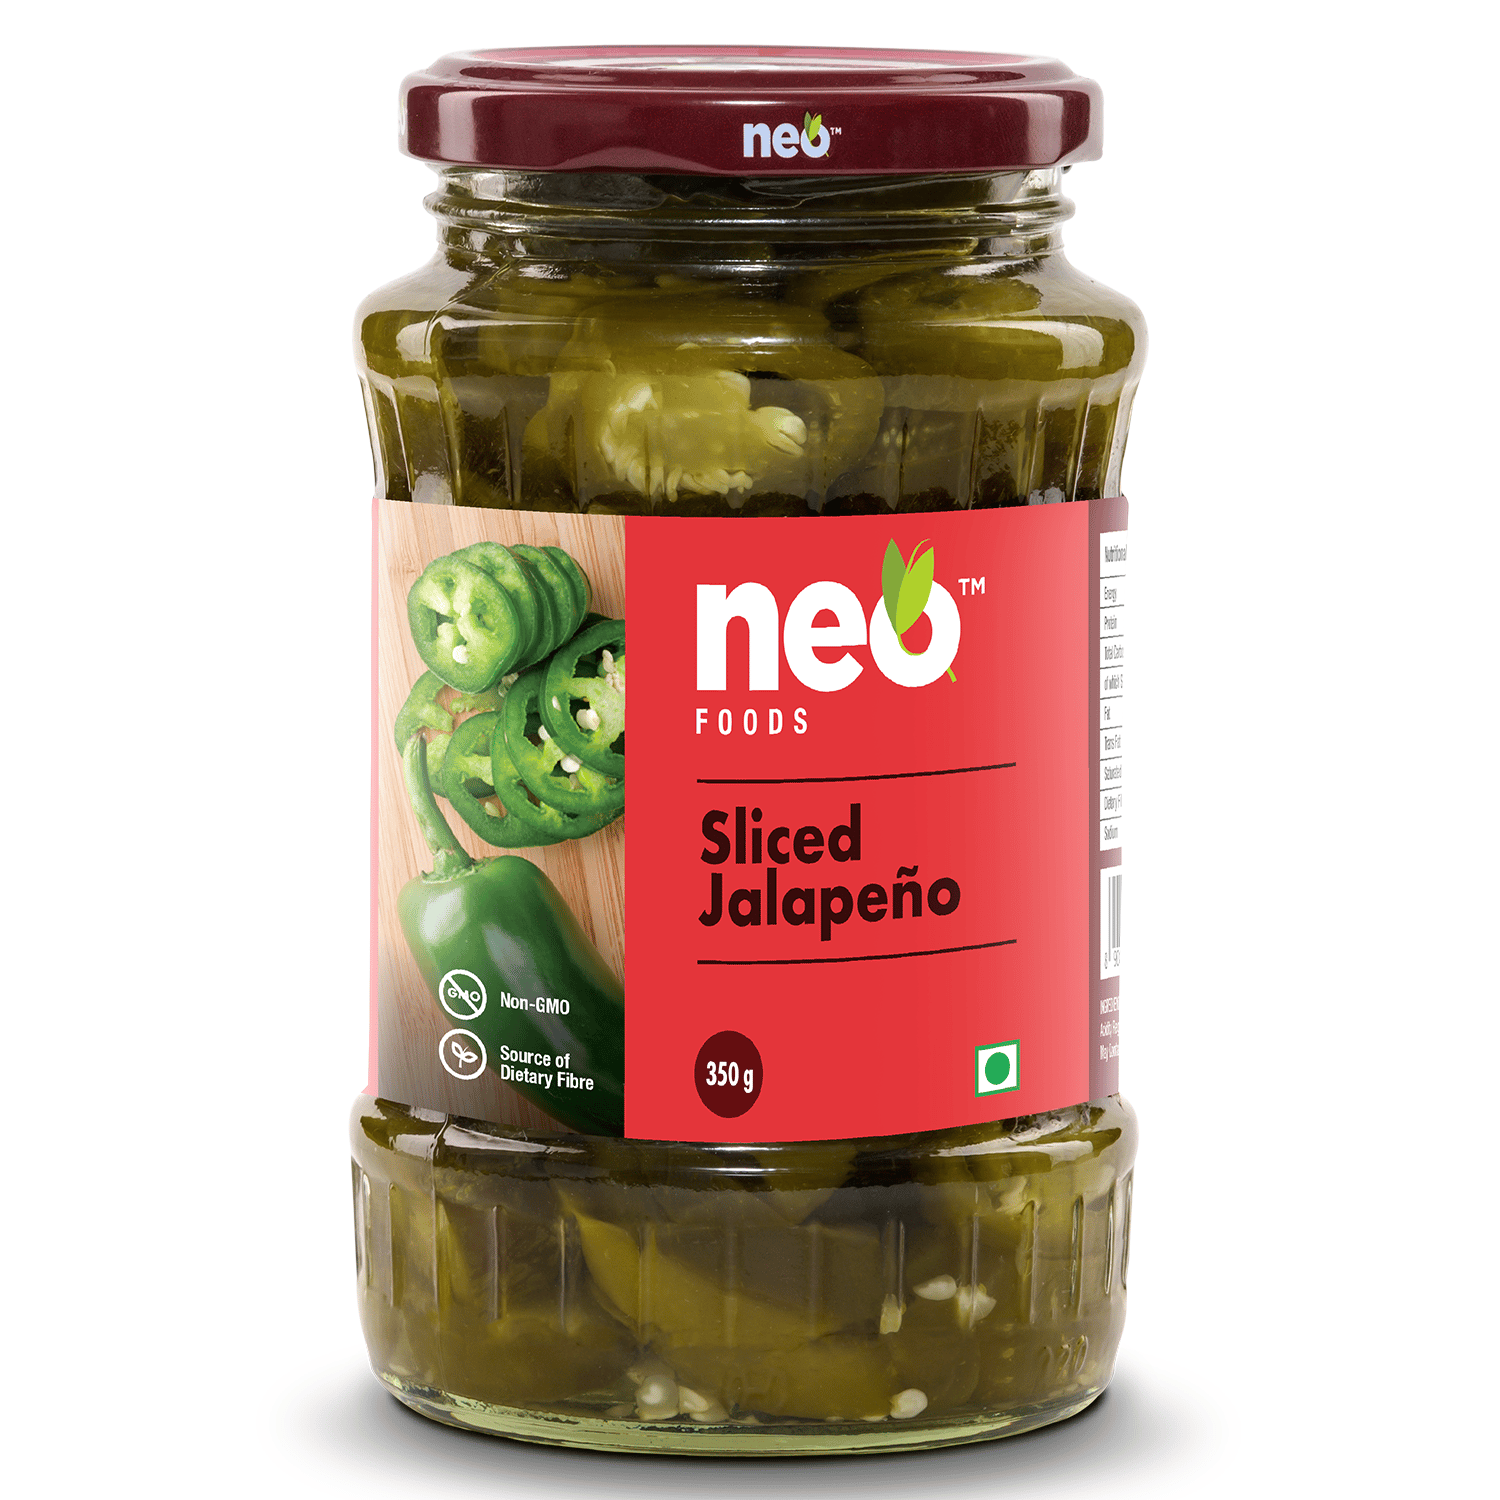 Neo Sliced Jalapeno 350g | Ready-to-Eat | Fibre-Rich | Topping for Snacks and Salads | Non-GMO | Glass Jar |